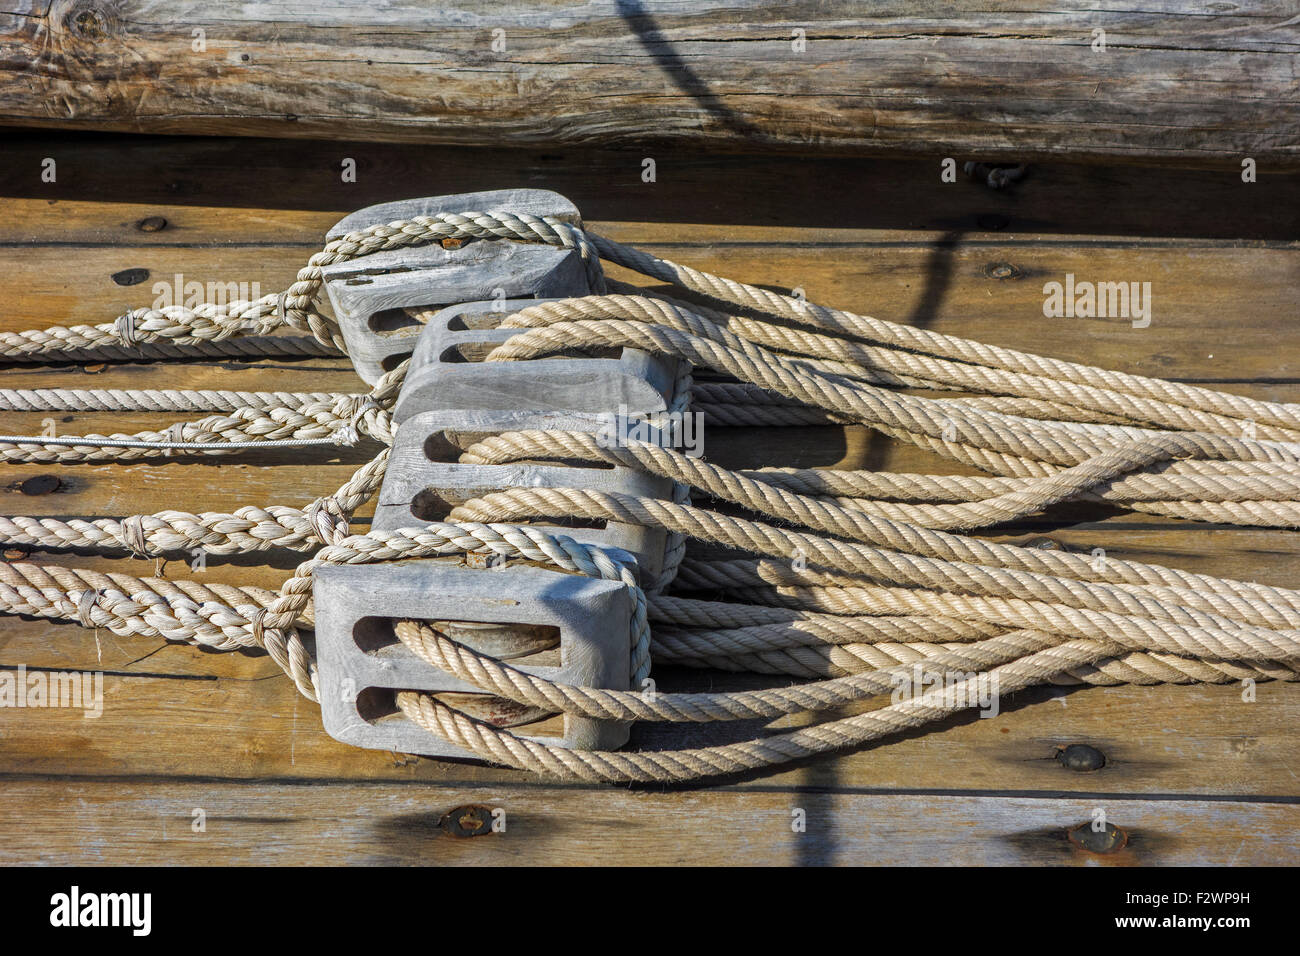 Ropes in wooden pulleys / blocks on deck of sailing boat / yacht Stock Photo